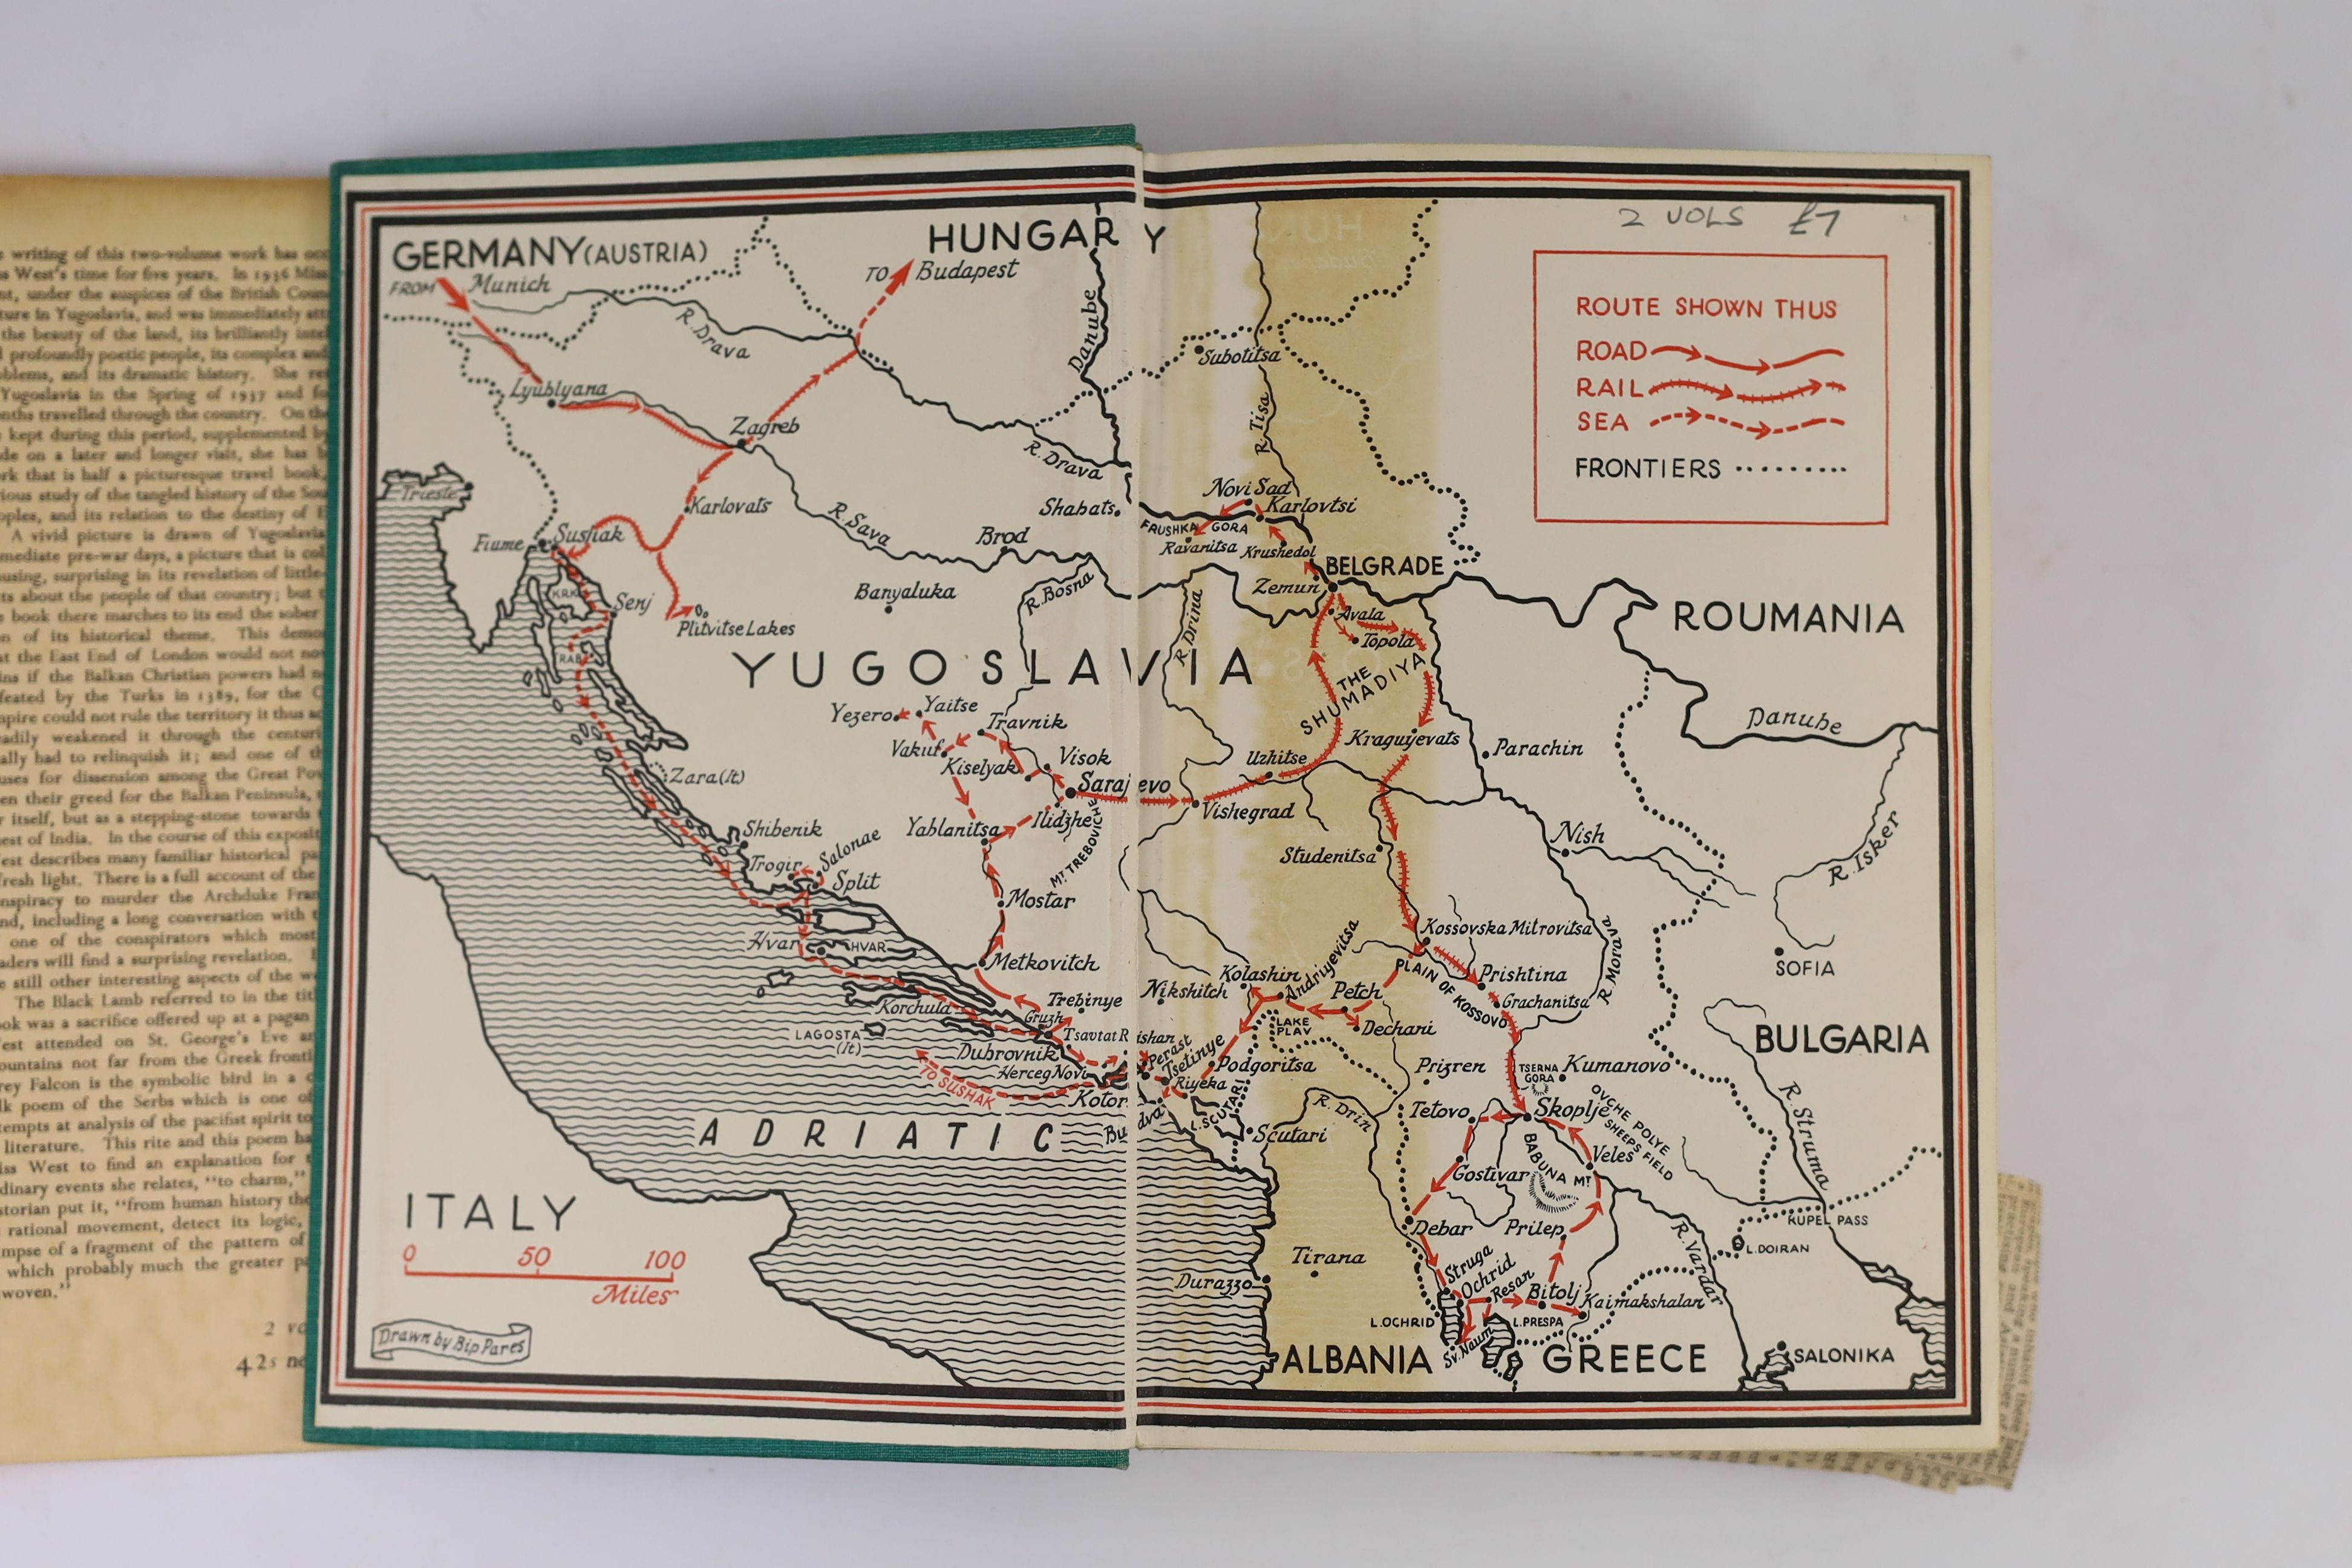 West, Rebecca - Black Lamb and Grey Falcon: The Record of a Journey Through Yugoslavia in 1937, 1st edition, 2 vols, 8vo, green cloth in unclipped d/j’s, cartographic endpapers, with 32 photographic plates, Macmillan & C